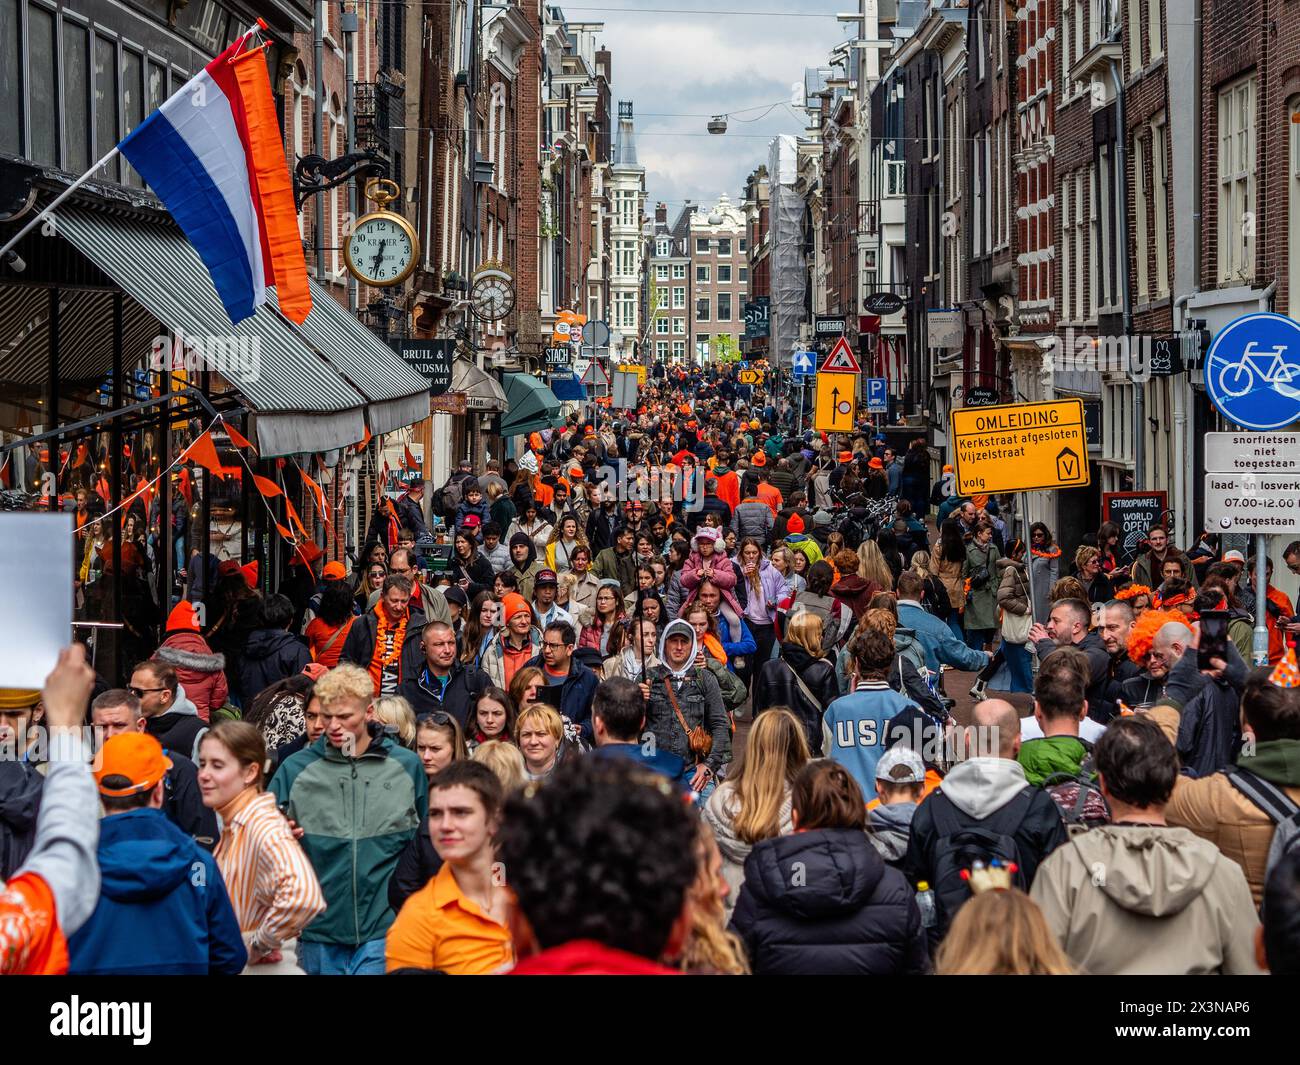 Amsterdam, Netherlands. 27th Apr, 2024. Streets are seen full of people enjoying the celebration. King's Day is renowned for being one of the biggest and most colorful festivities in the country, especially in Amsterdam. The city is bursting with orange as people enjoy the biggest street party of the year, enjoying the free markets and having fun on the boats along the canals. Credit: SOPA Images Limited/Alamy Live News Stock Photo